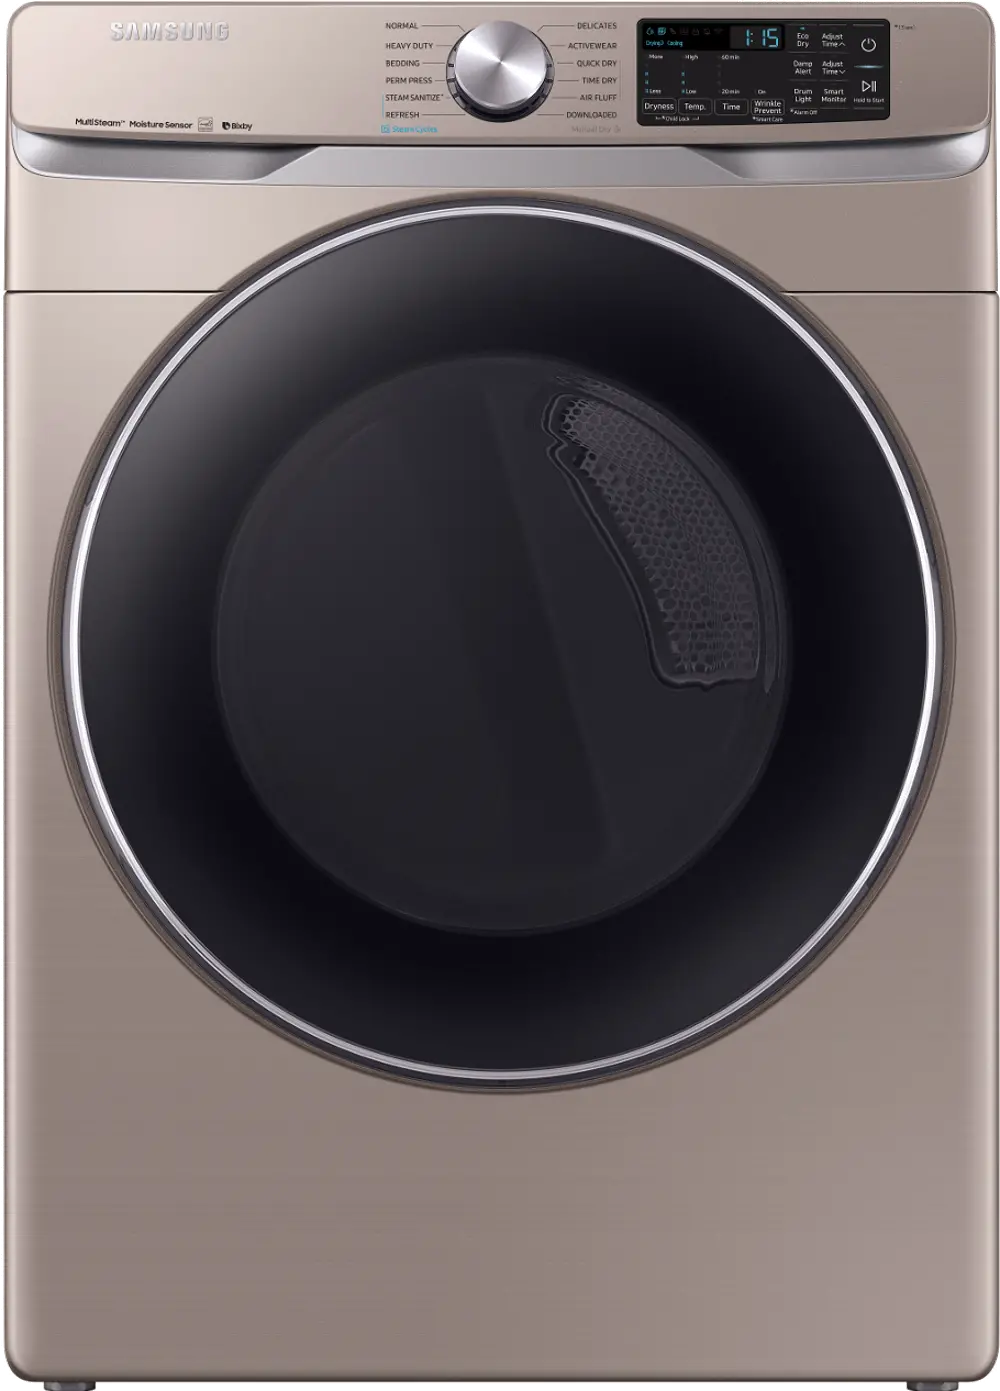 DVE45R6300C Samsung Bixby Enabled Electric Dryer - 7.5 cu. ft. Champagne-1